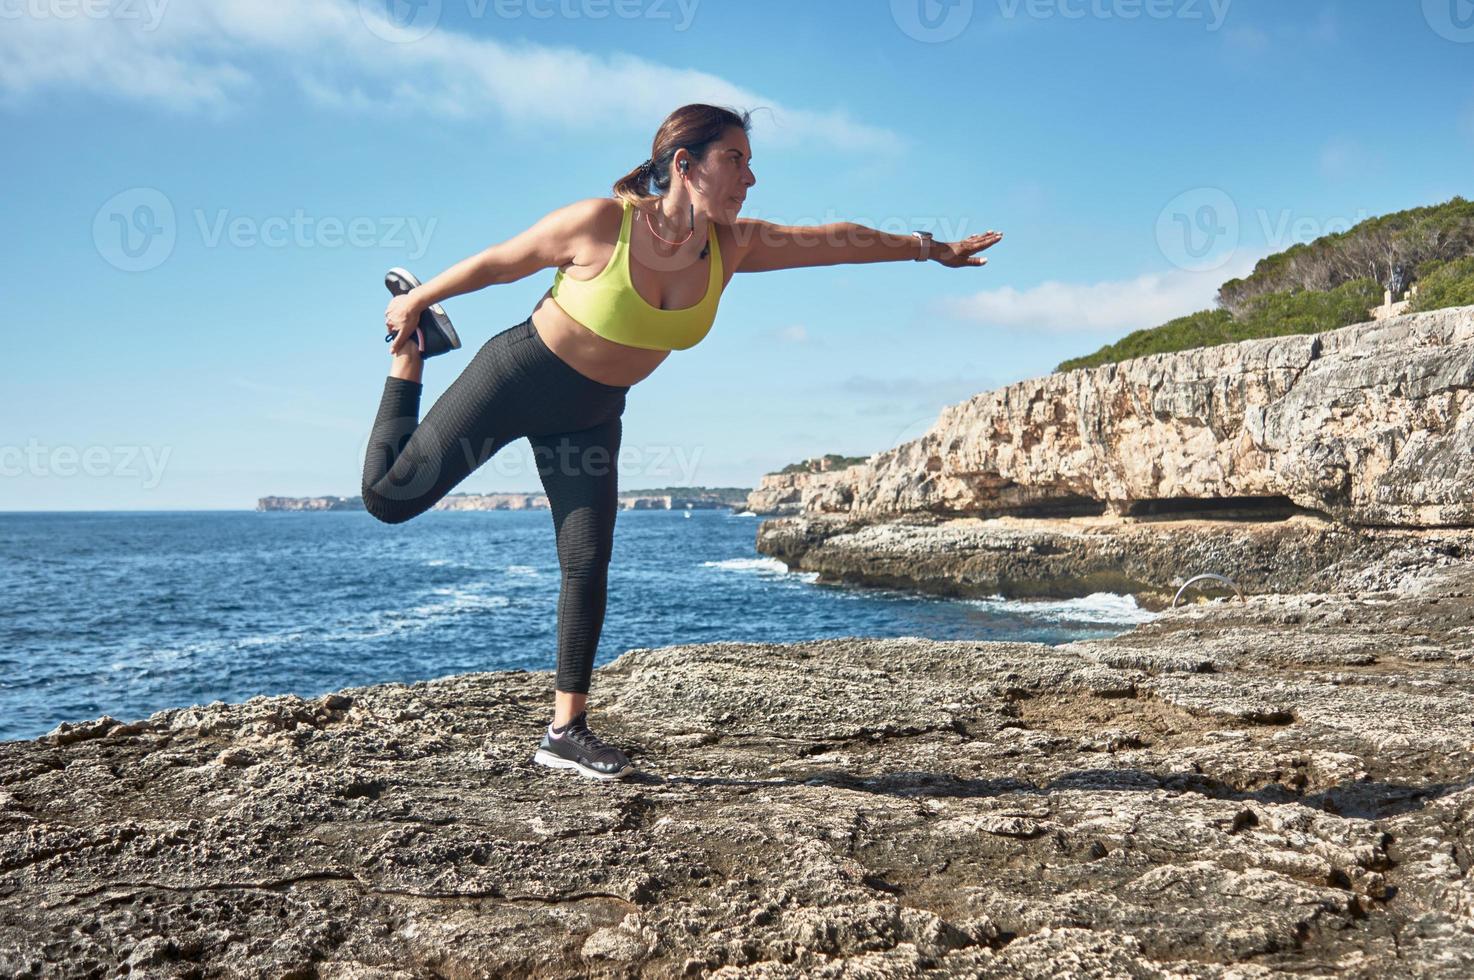 Latin woman, middle-aged, wearing sportswear, training, doing physical exercises, plank, sit-ups, climber's step, burning calories, keeping fit, outdoors by the sea, wearing headphones, smart watch photo